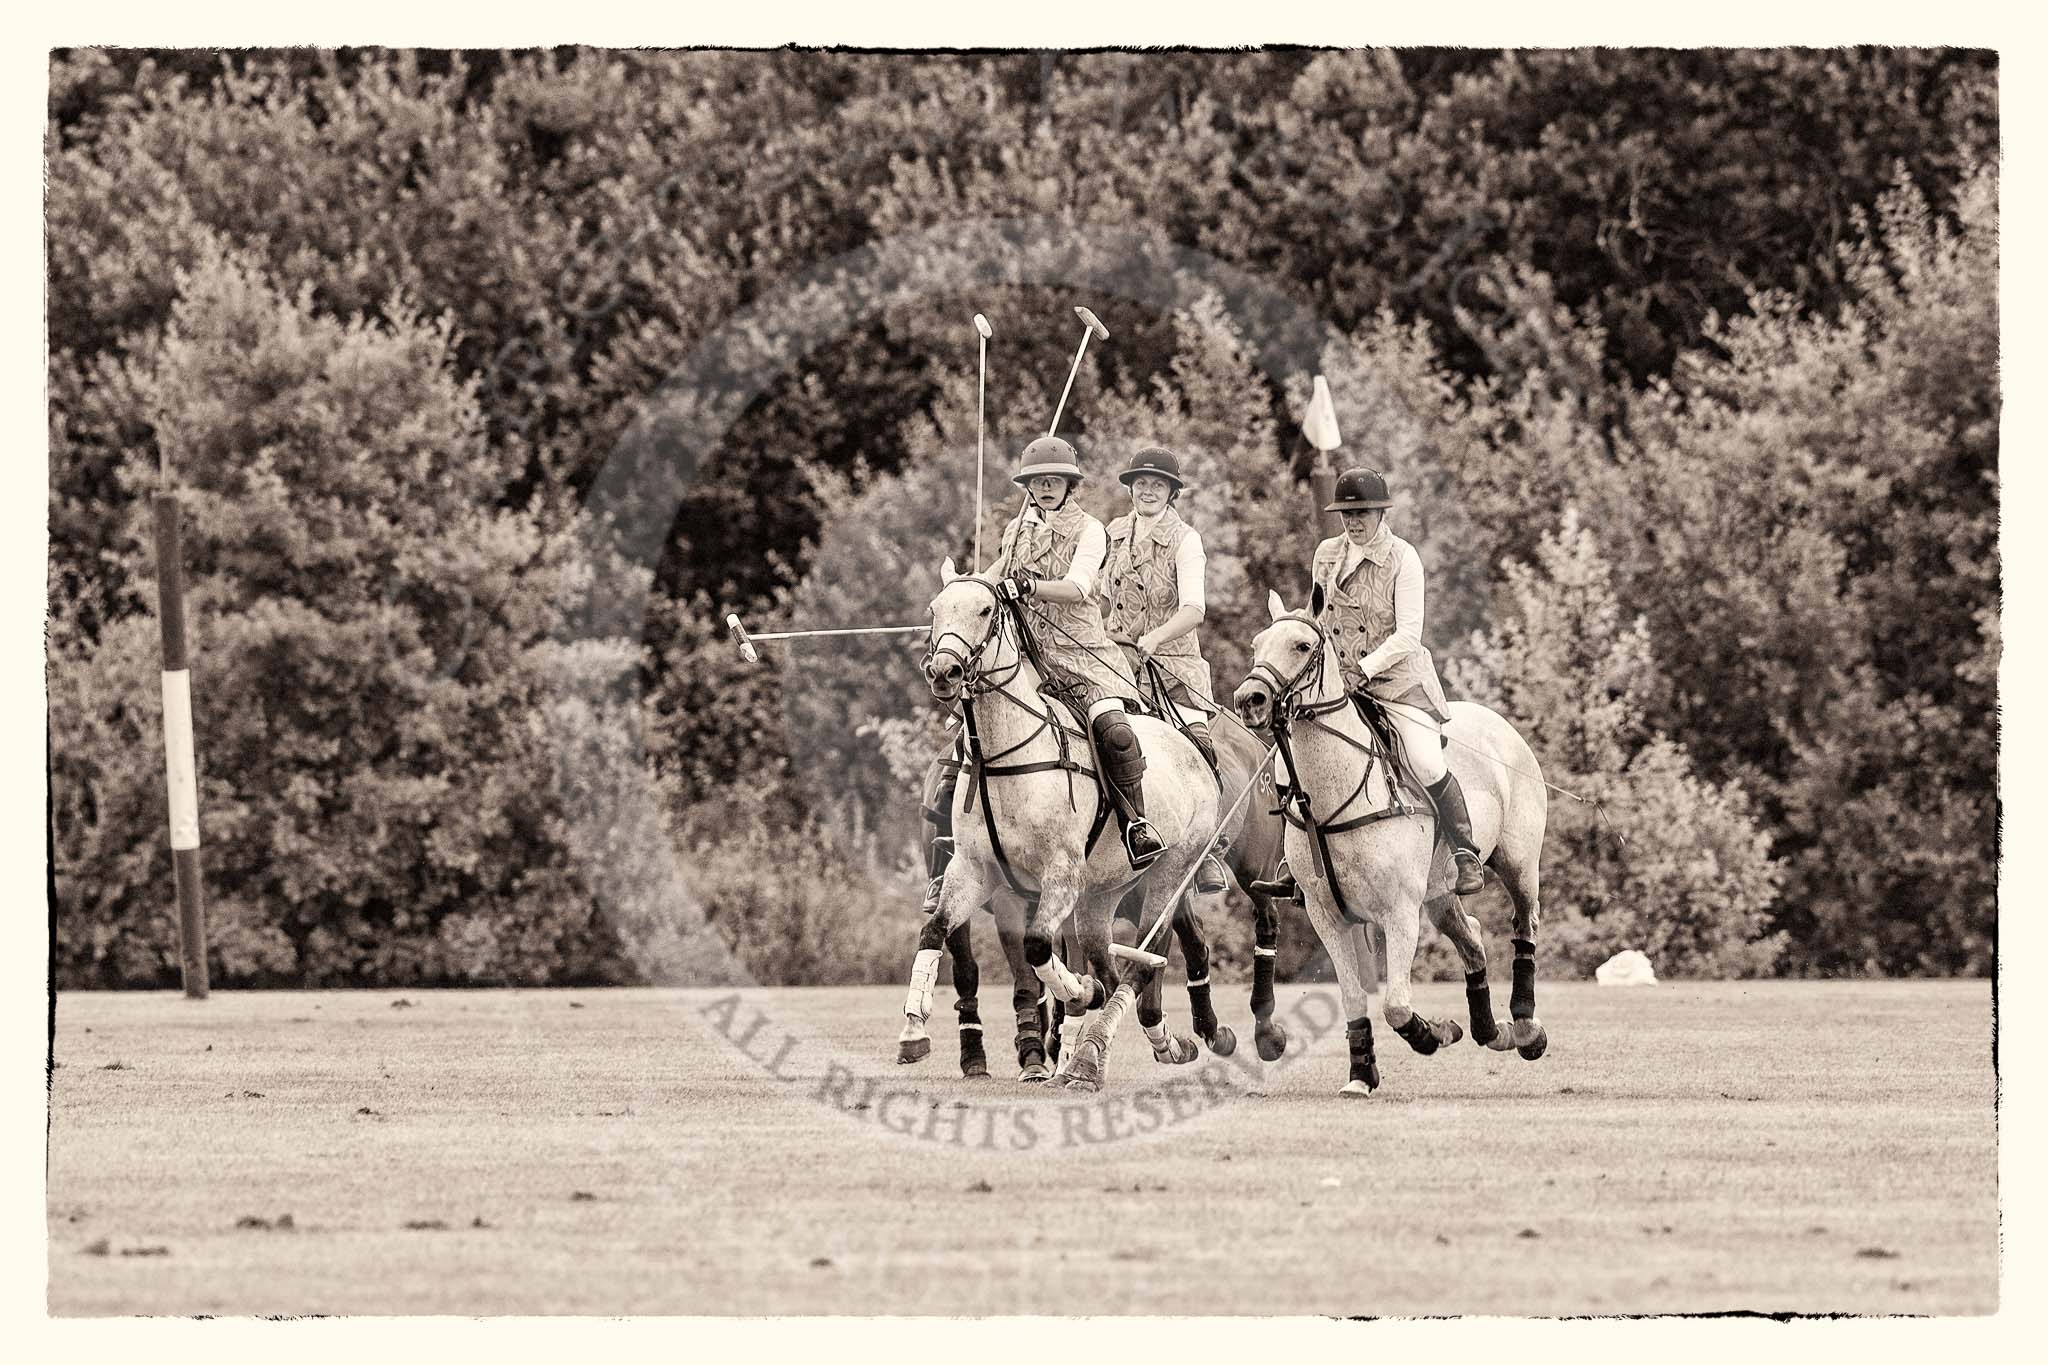 7th Heritage Polo Cup semi-finals: The Amazons of Polo sponsored by Polistas..
Hurtwood Park Polo Club,
Ewhurst Green,
Surrey,
United Kingdom,
on 04 August 2012 at 13:11, image #102